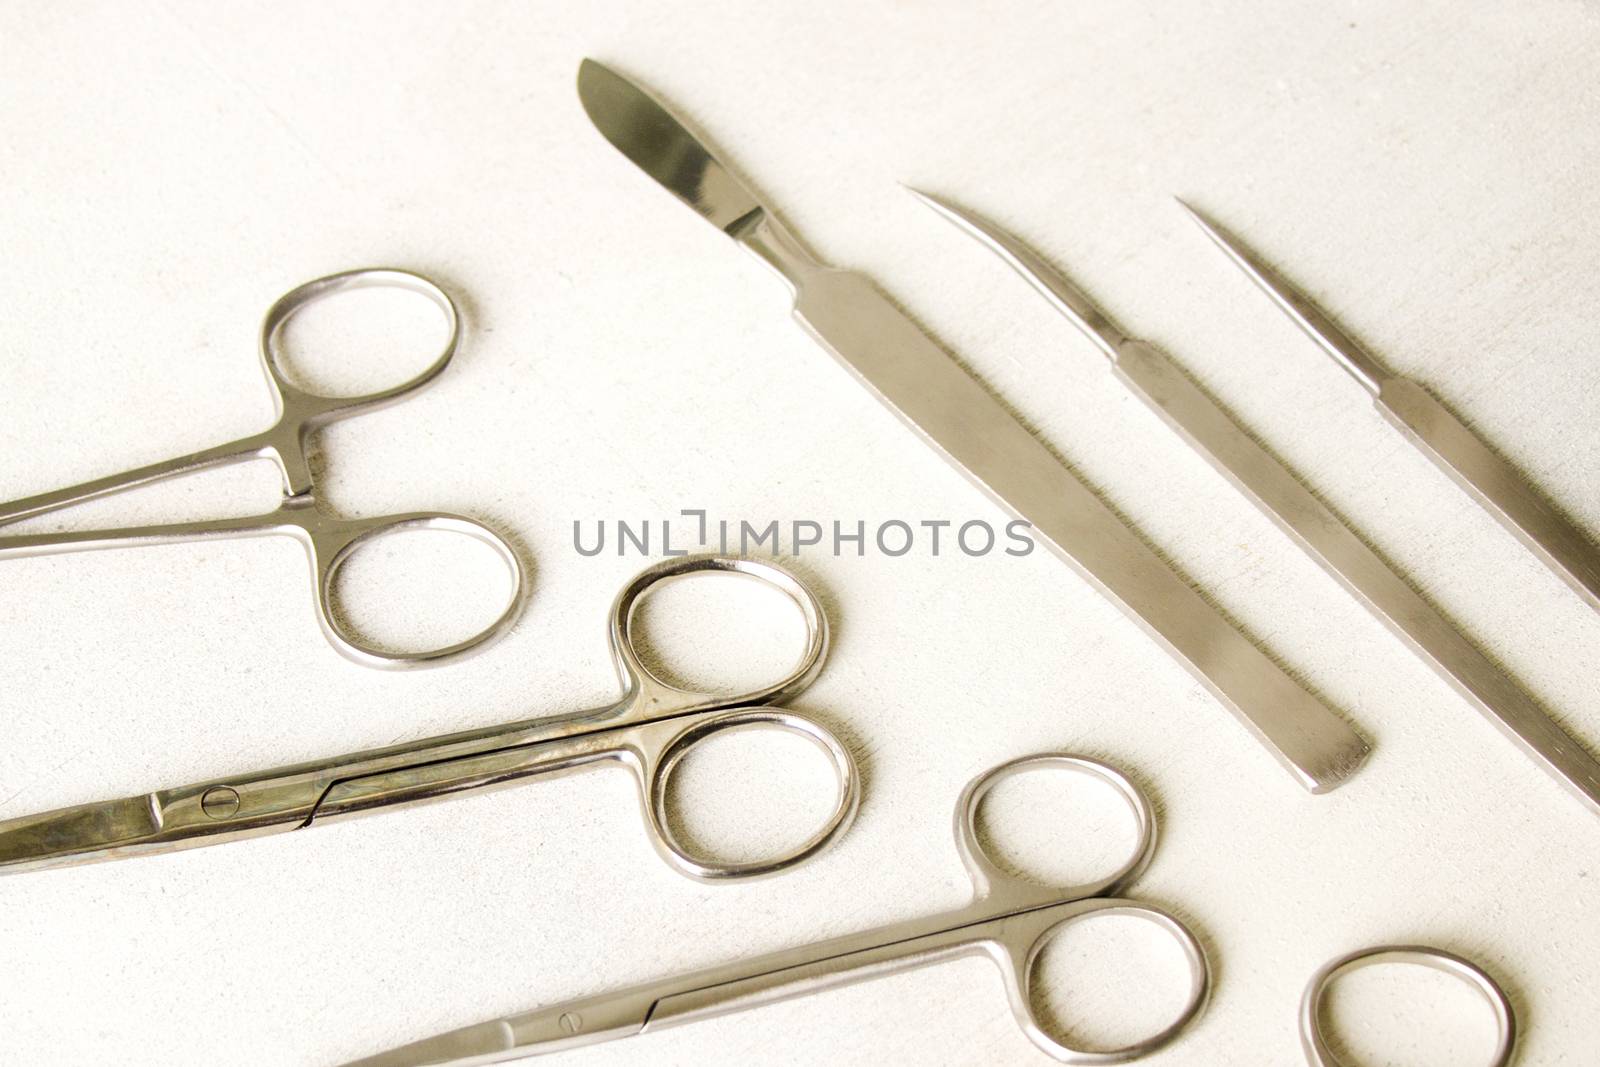 Dissection Kit - Premium Quality Stainless Steel Tools for Medical Students of Anatomy, Biology, Veterinary, Marine Biology by Taidundua